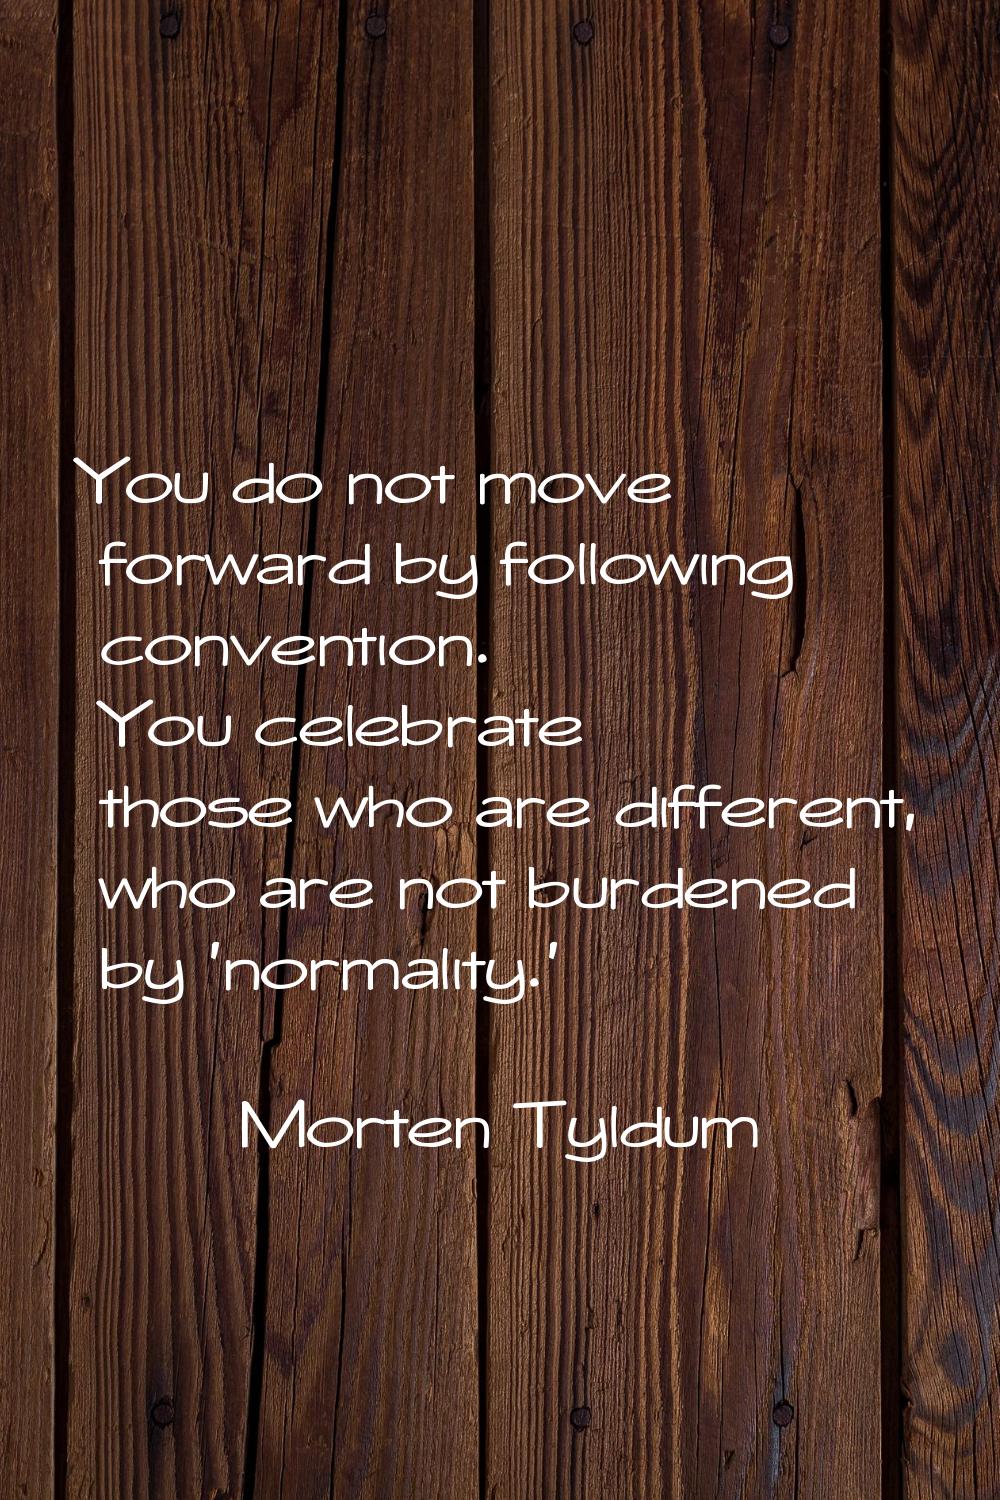 You do not move forward by following convention. You celebrate those who are different, who are not